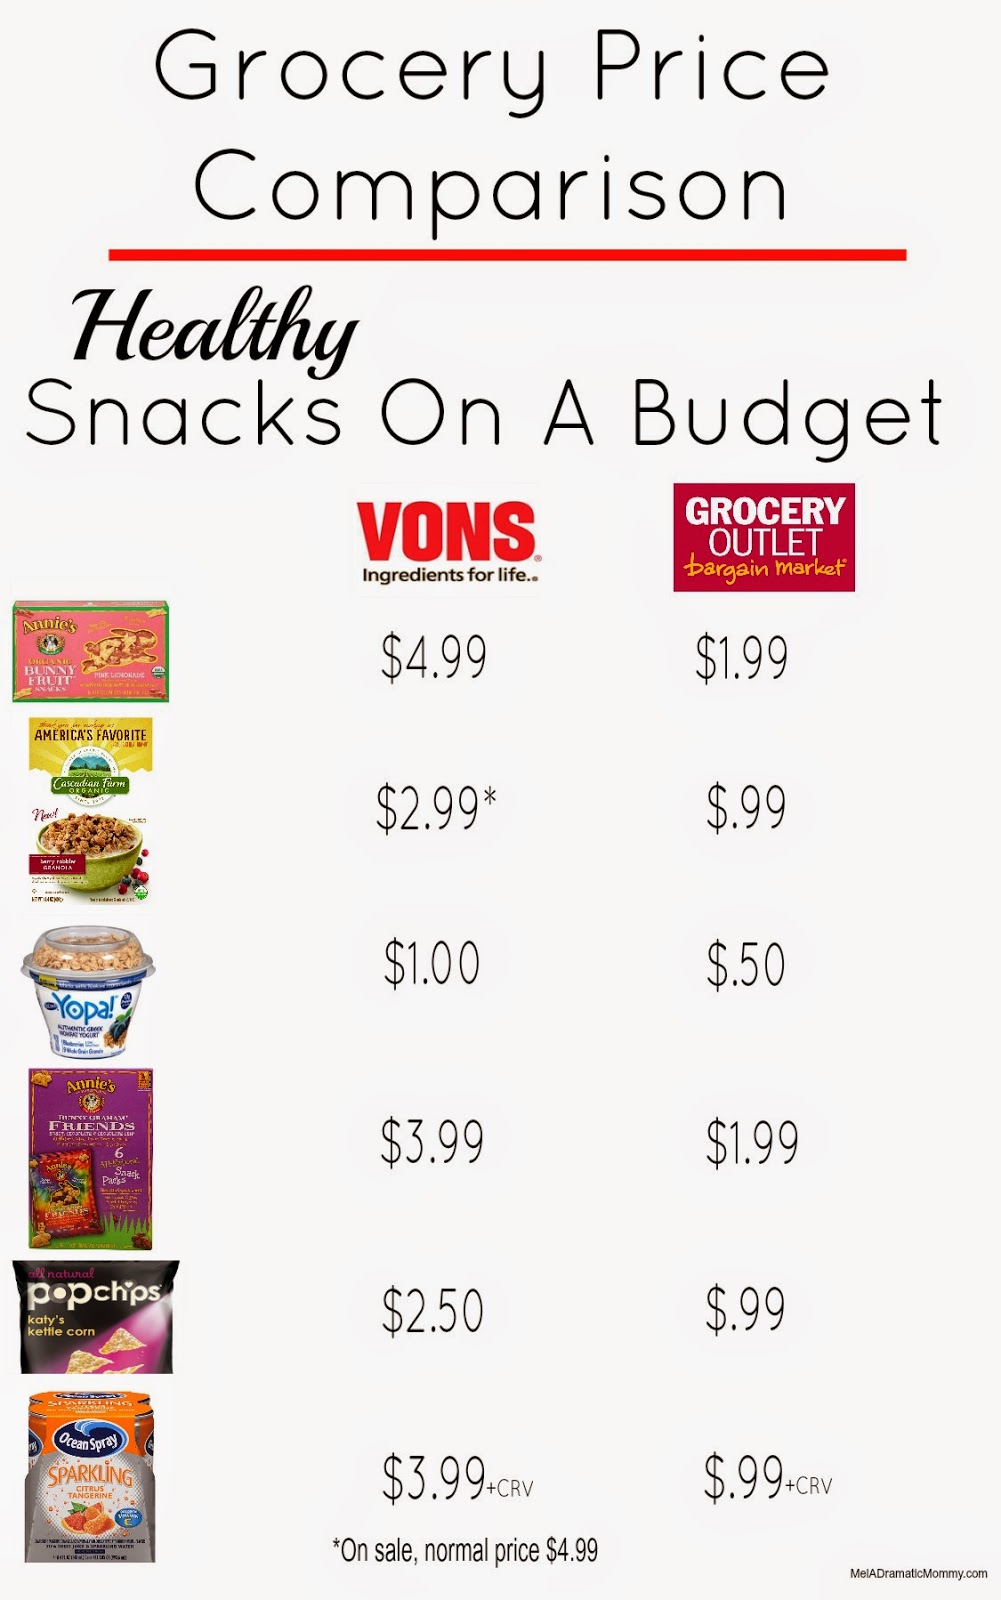 Grocery-Price-Comparison-Vons-Grocery-Outlet - Grocery Outlet